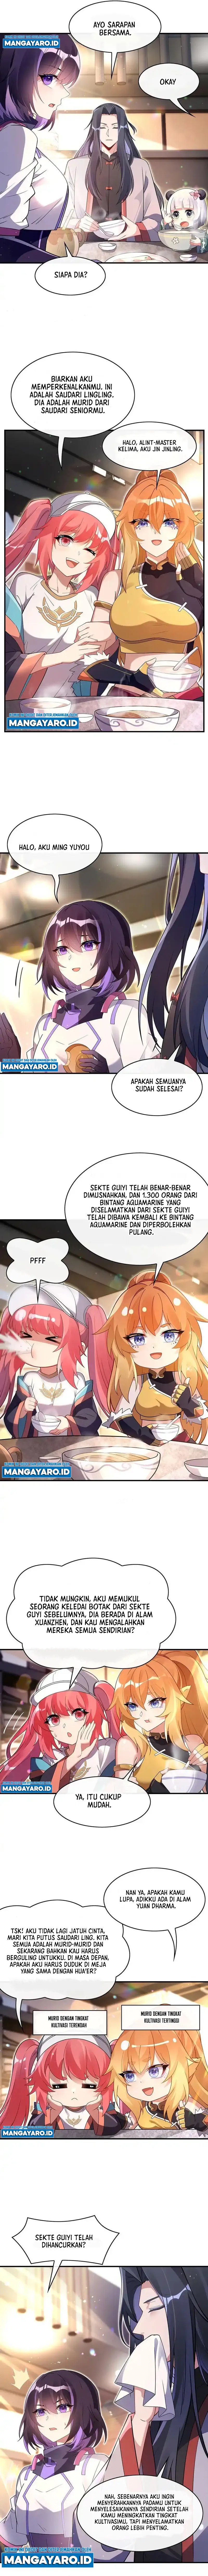 Dilarang COPAS - situs resmi www.mangacanblog.com - Komik my female apprentices are all big shots from the future 271 - chapter 271 272 Indonesia my female apprentices are all big shots from the future 271 - chapter 271 Terbaru 4|Baca Manga Komik Indonesia|Mangacan